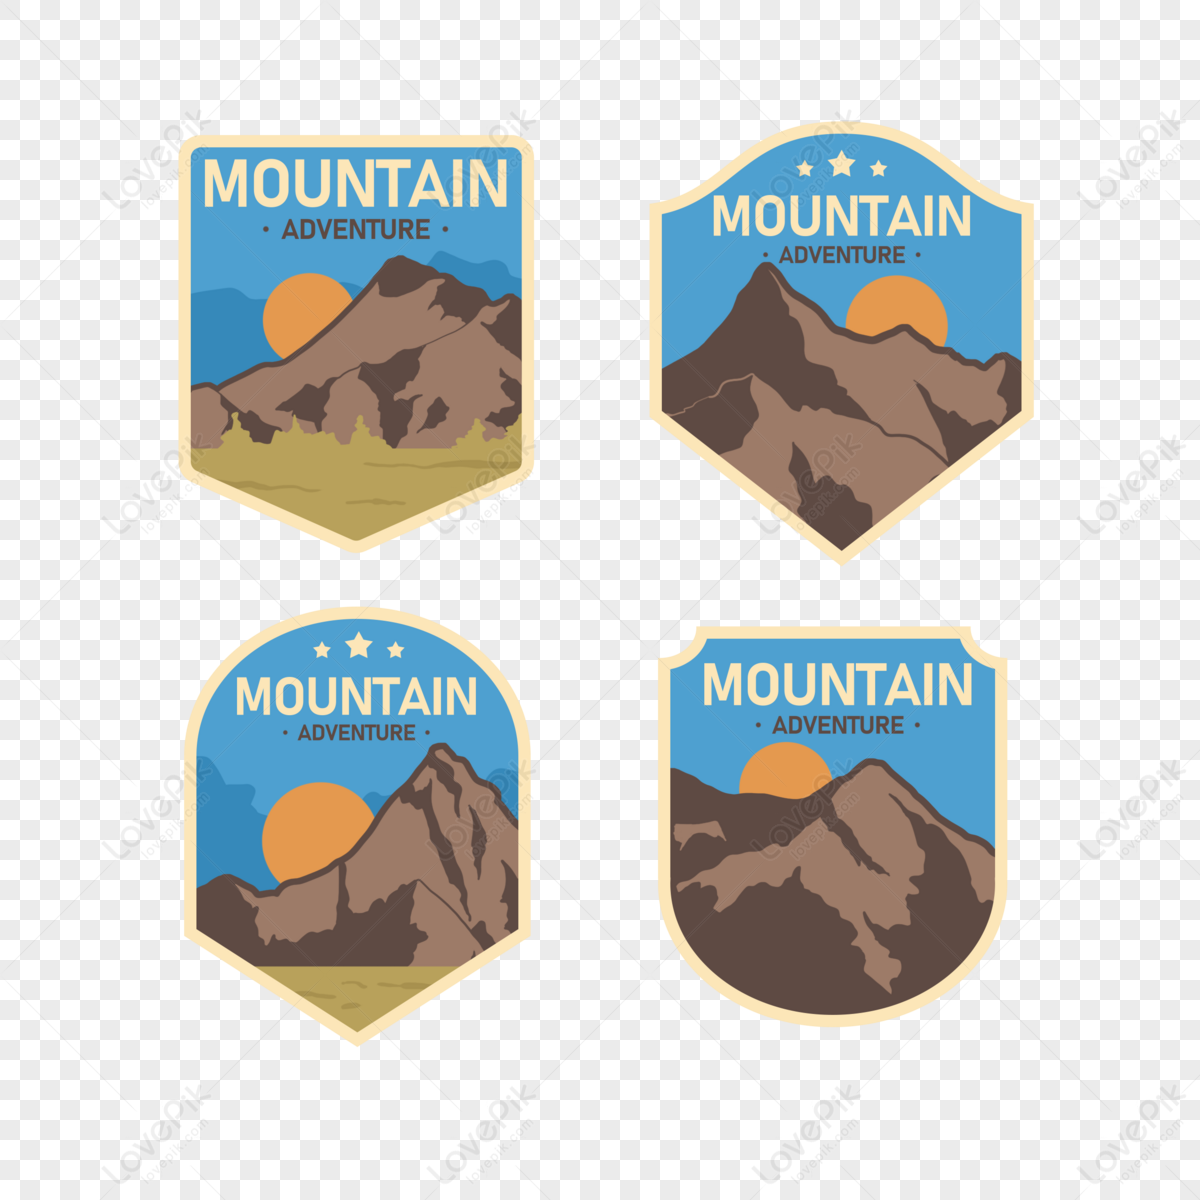 Mountaineering trip hand-painted stickers,symbol,style,labels png free download